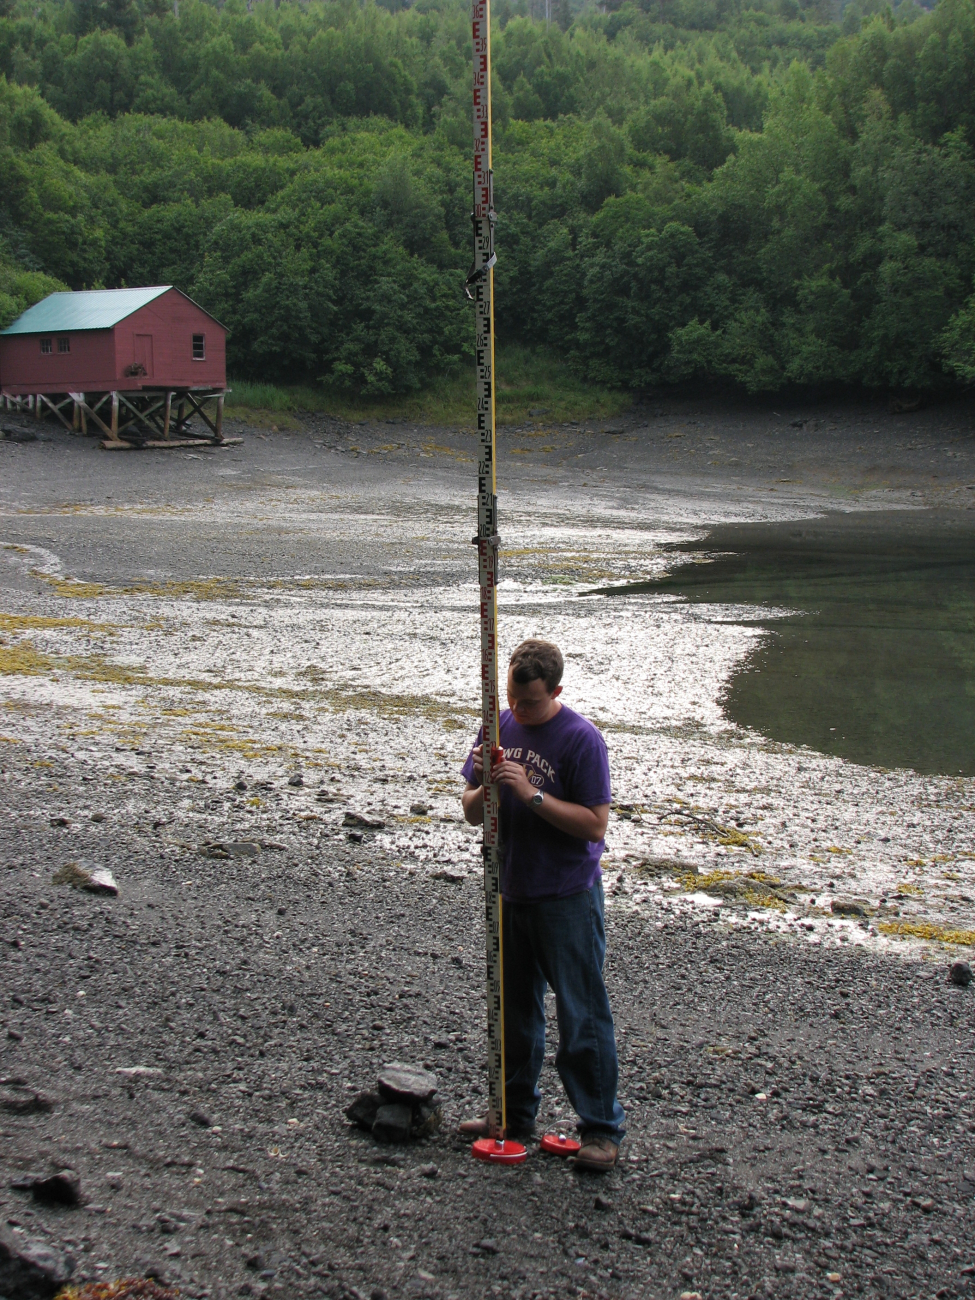 Maintaining the level rod in a vertical orientation during tide gage levelingat a quiet cove at low tide